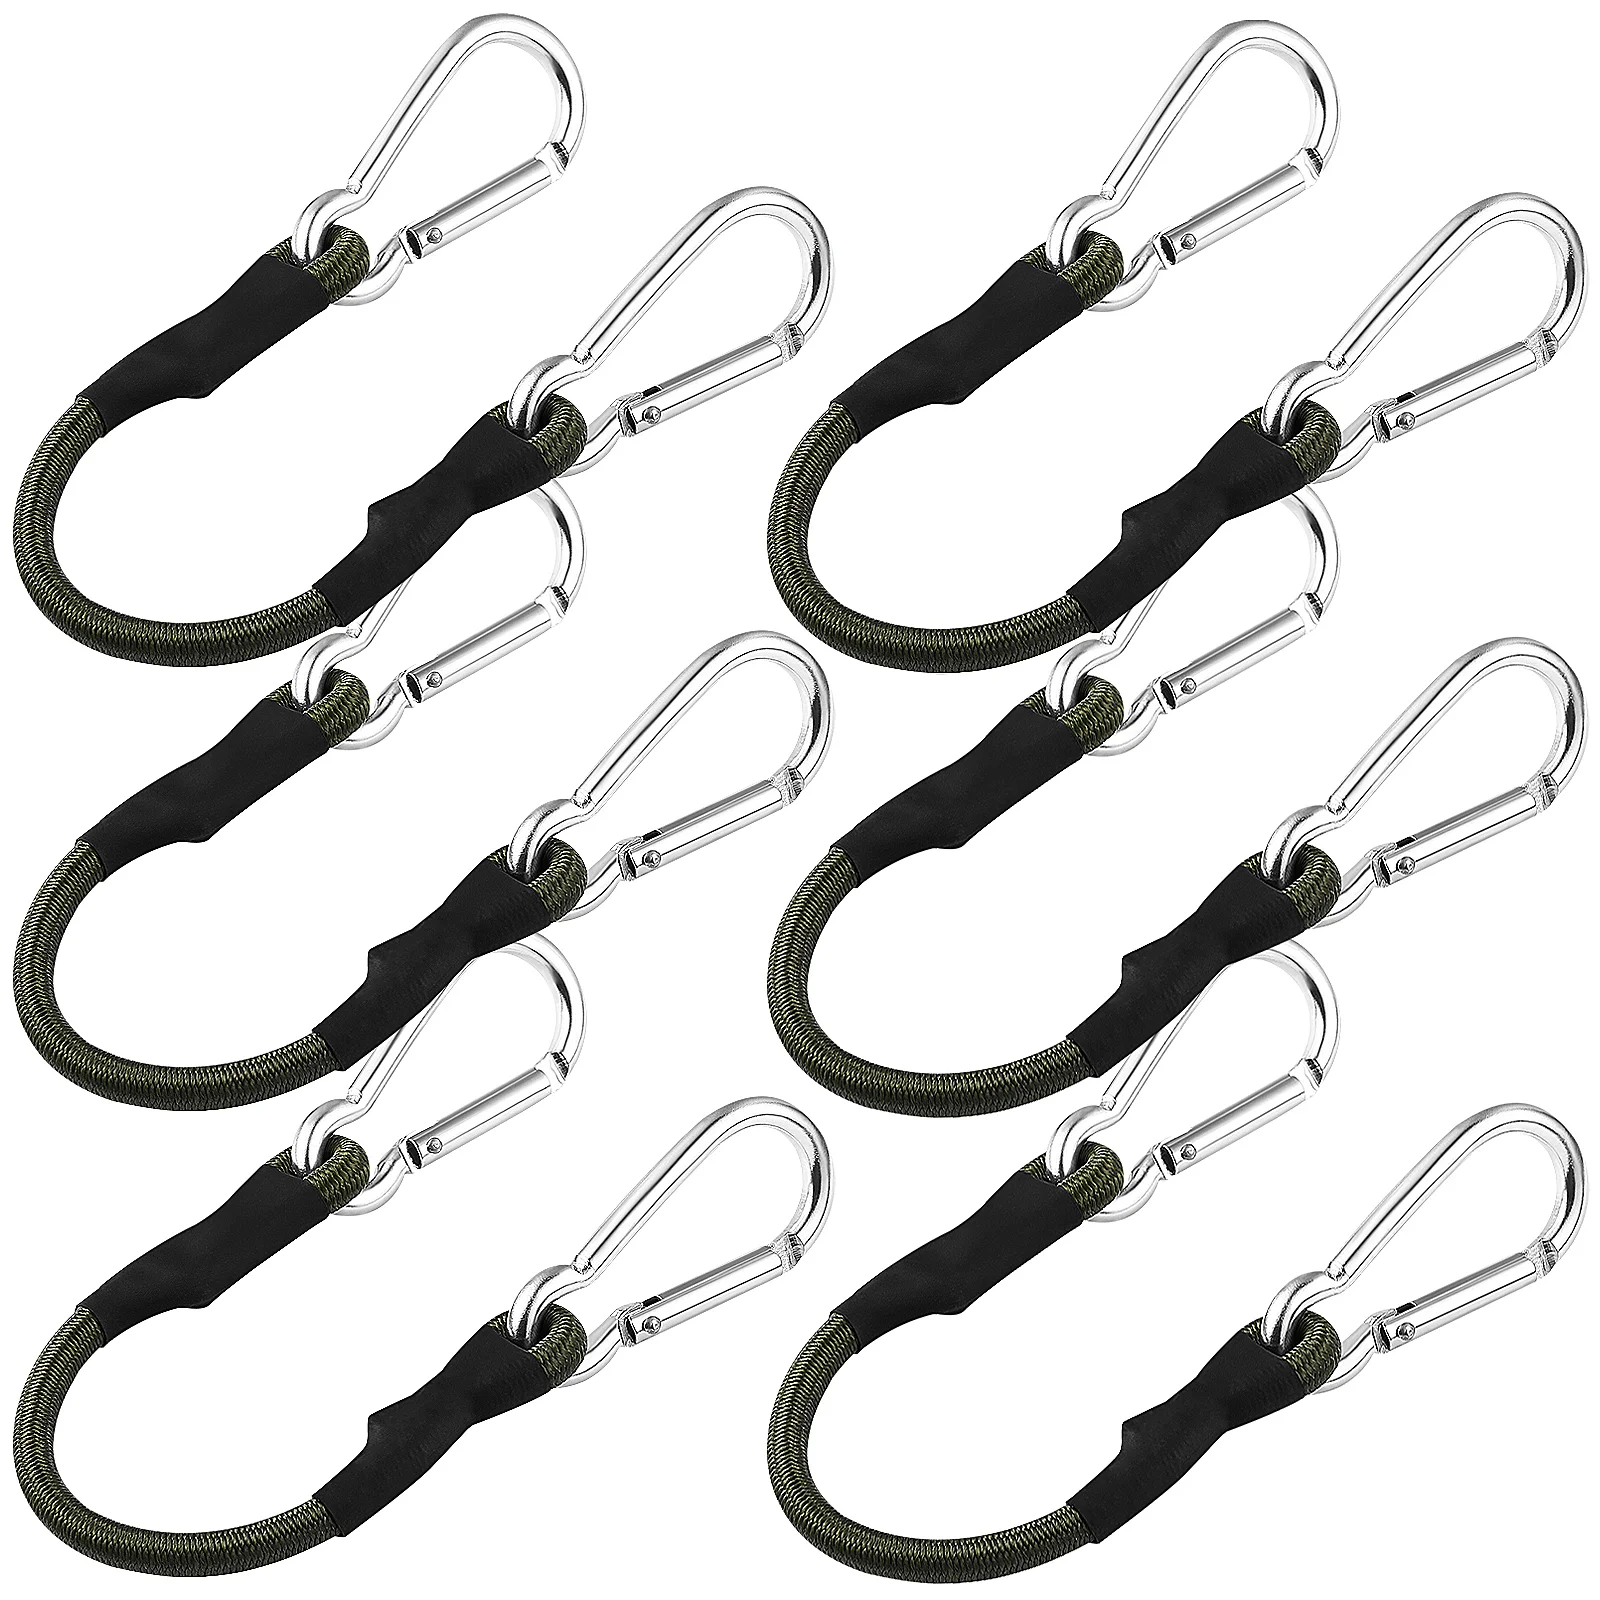 

6 Pcs Elastic Rope Bungee Cord Outdoor Ropes Clothesline Packing Cords Camping Tents Carabiner Hooks Binding Belt Heavy Straps